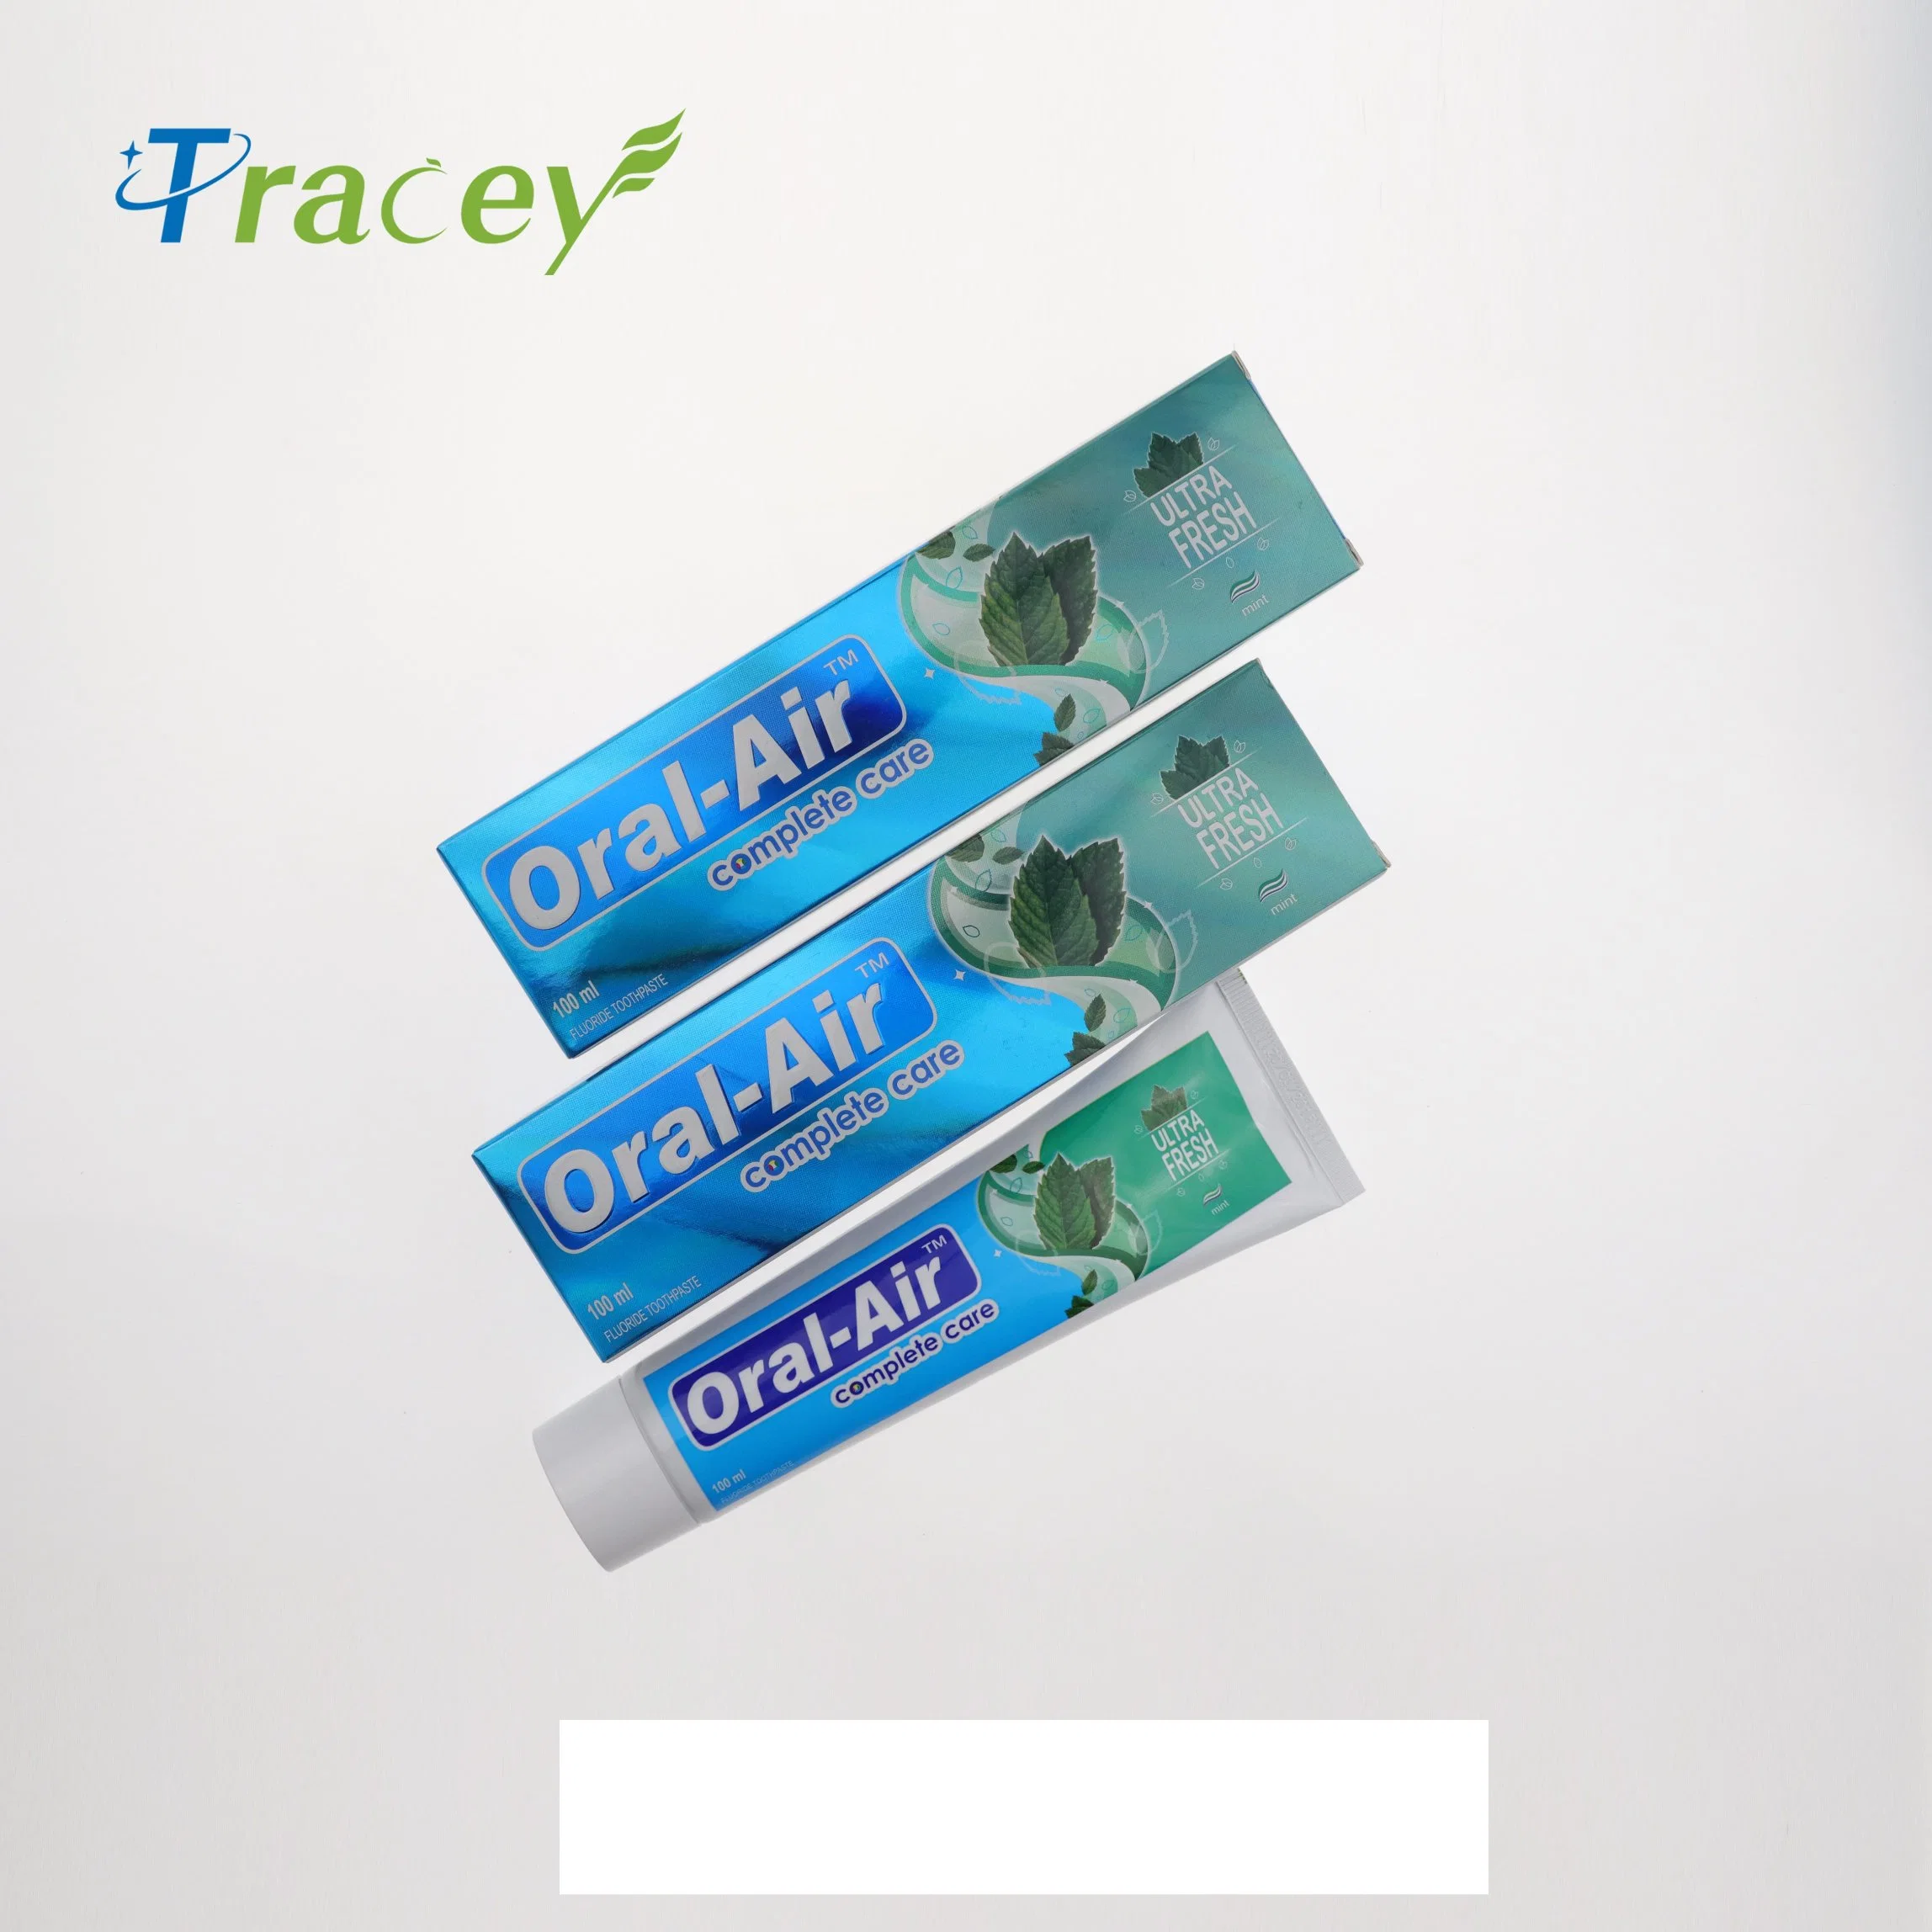 New Oral-Air Brand Toothpaste Triple Action Double/3 Color OEM/ODM Cheap Toothpaste Dentifrice Factory